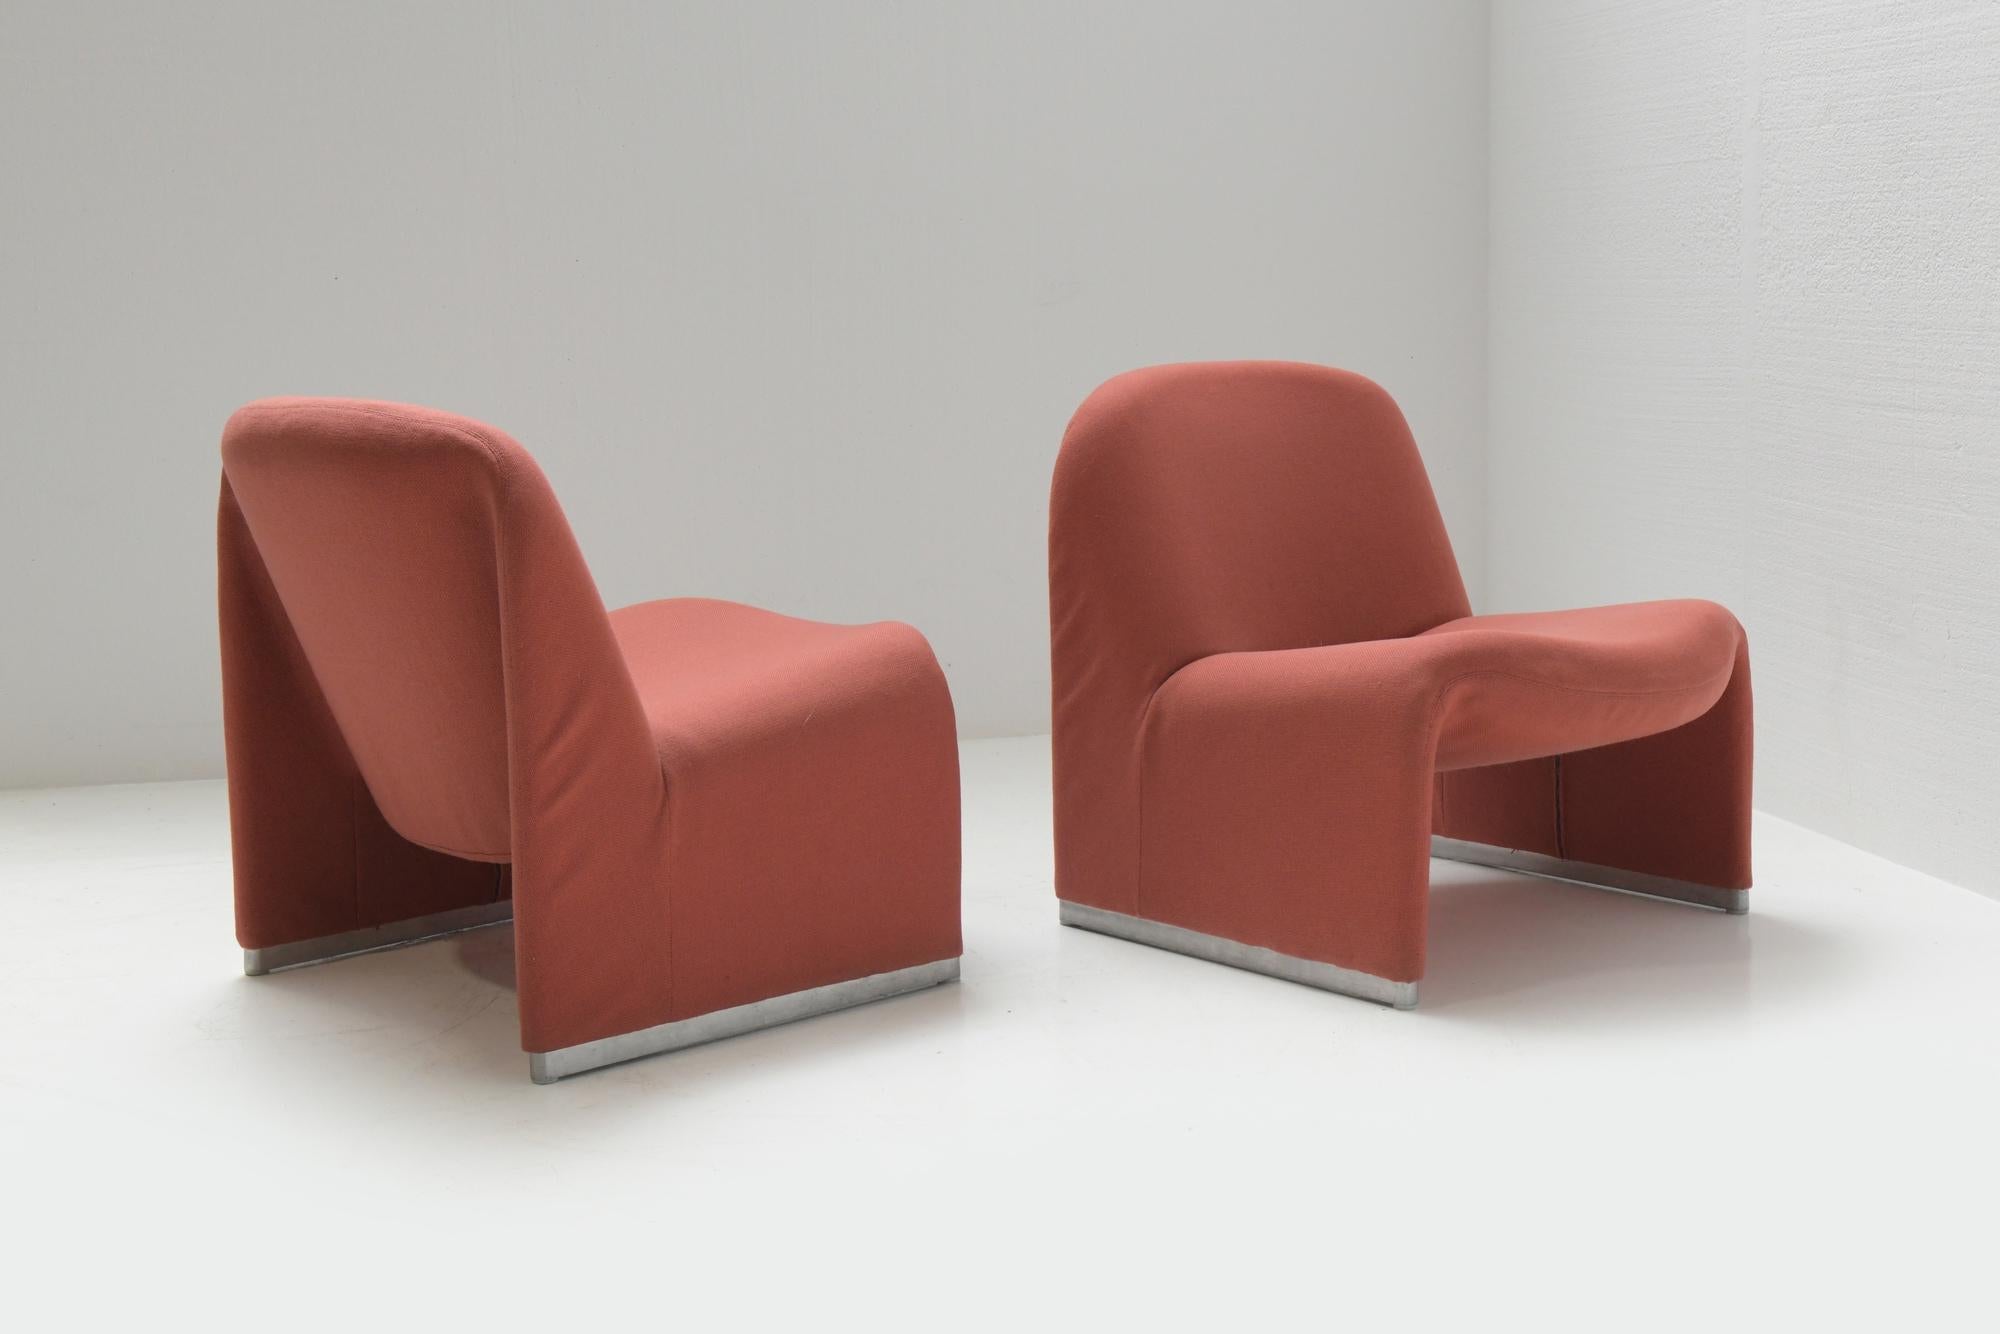 Italian  Vintage Alky chairs in original red fabric by Giancarlo Piretti for Castelli